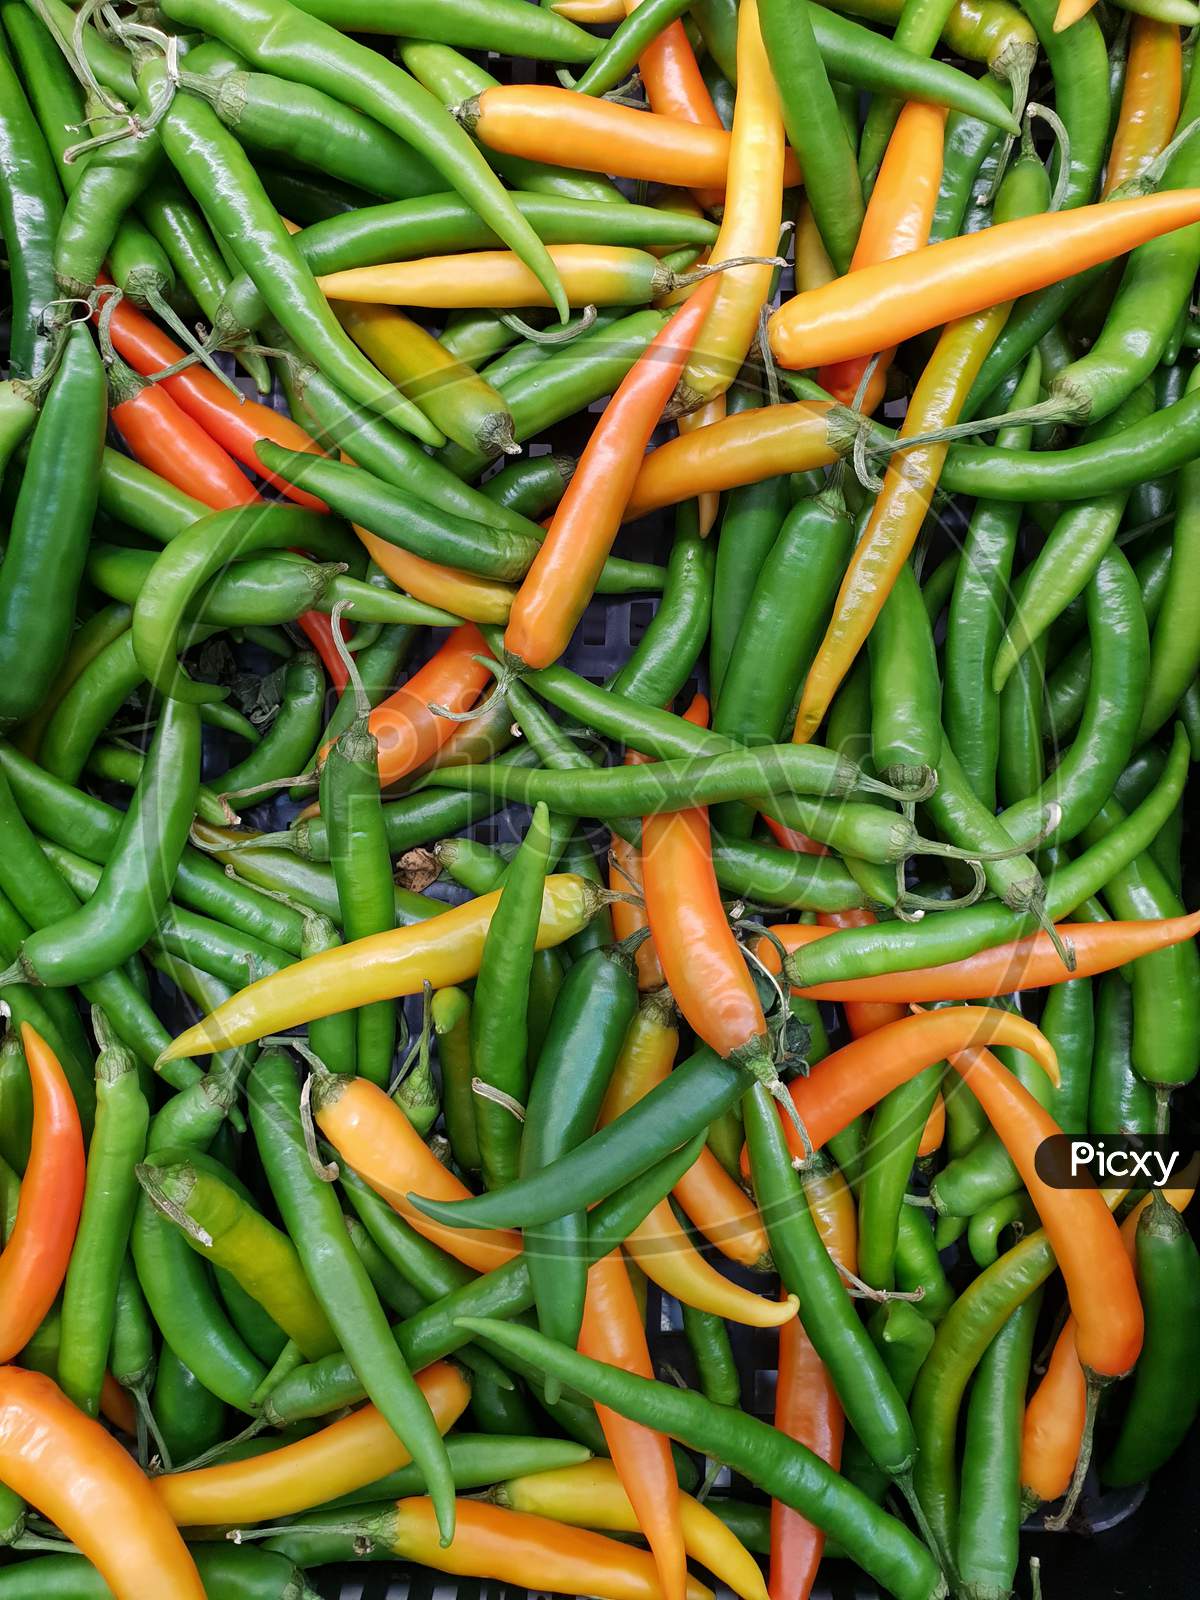 Green Hot Chili Peppers, Closeup View And For Sale In Market